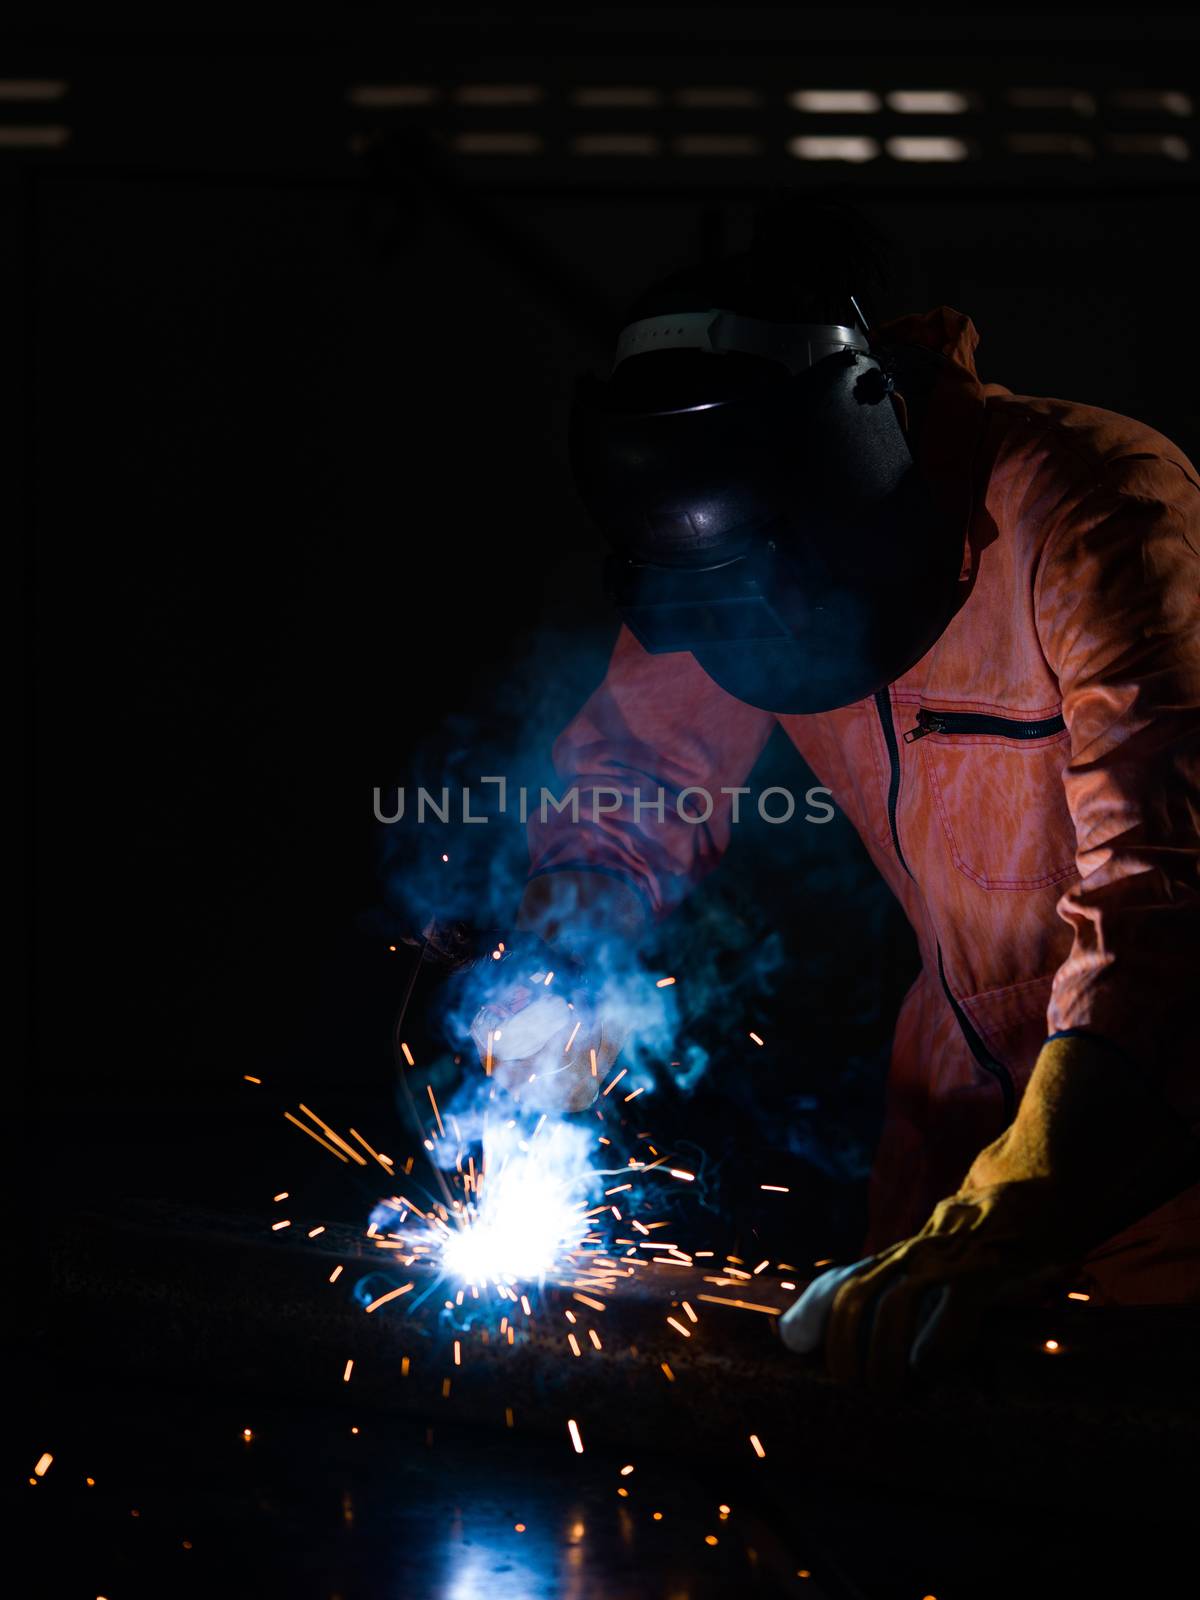 Metal industry workers are welding steel sheets for real estate projects received. Sparkler on dark background, close-up. Heavy work in factory.